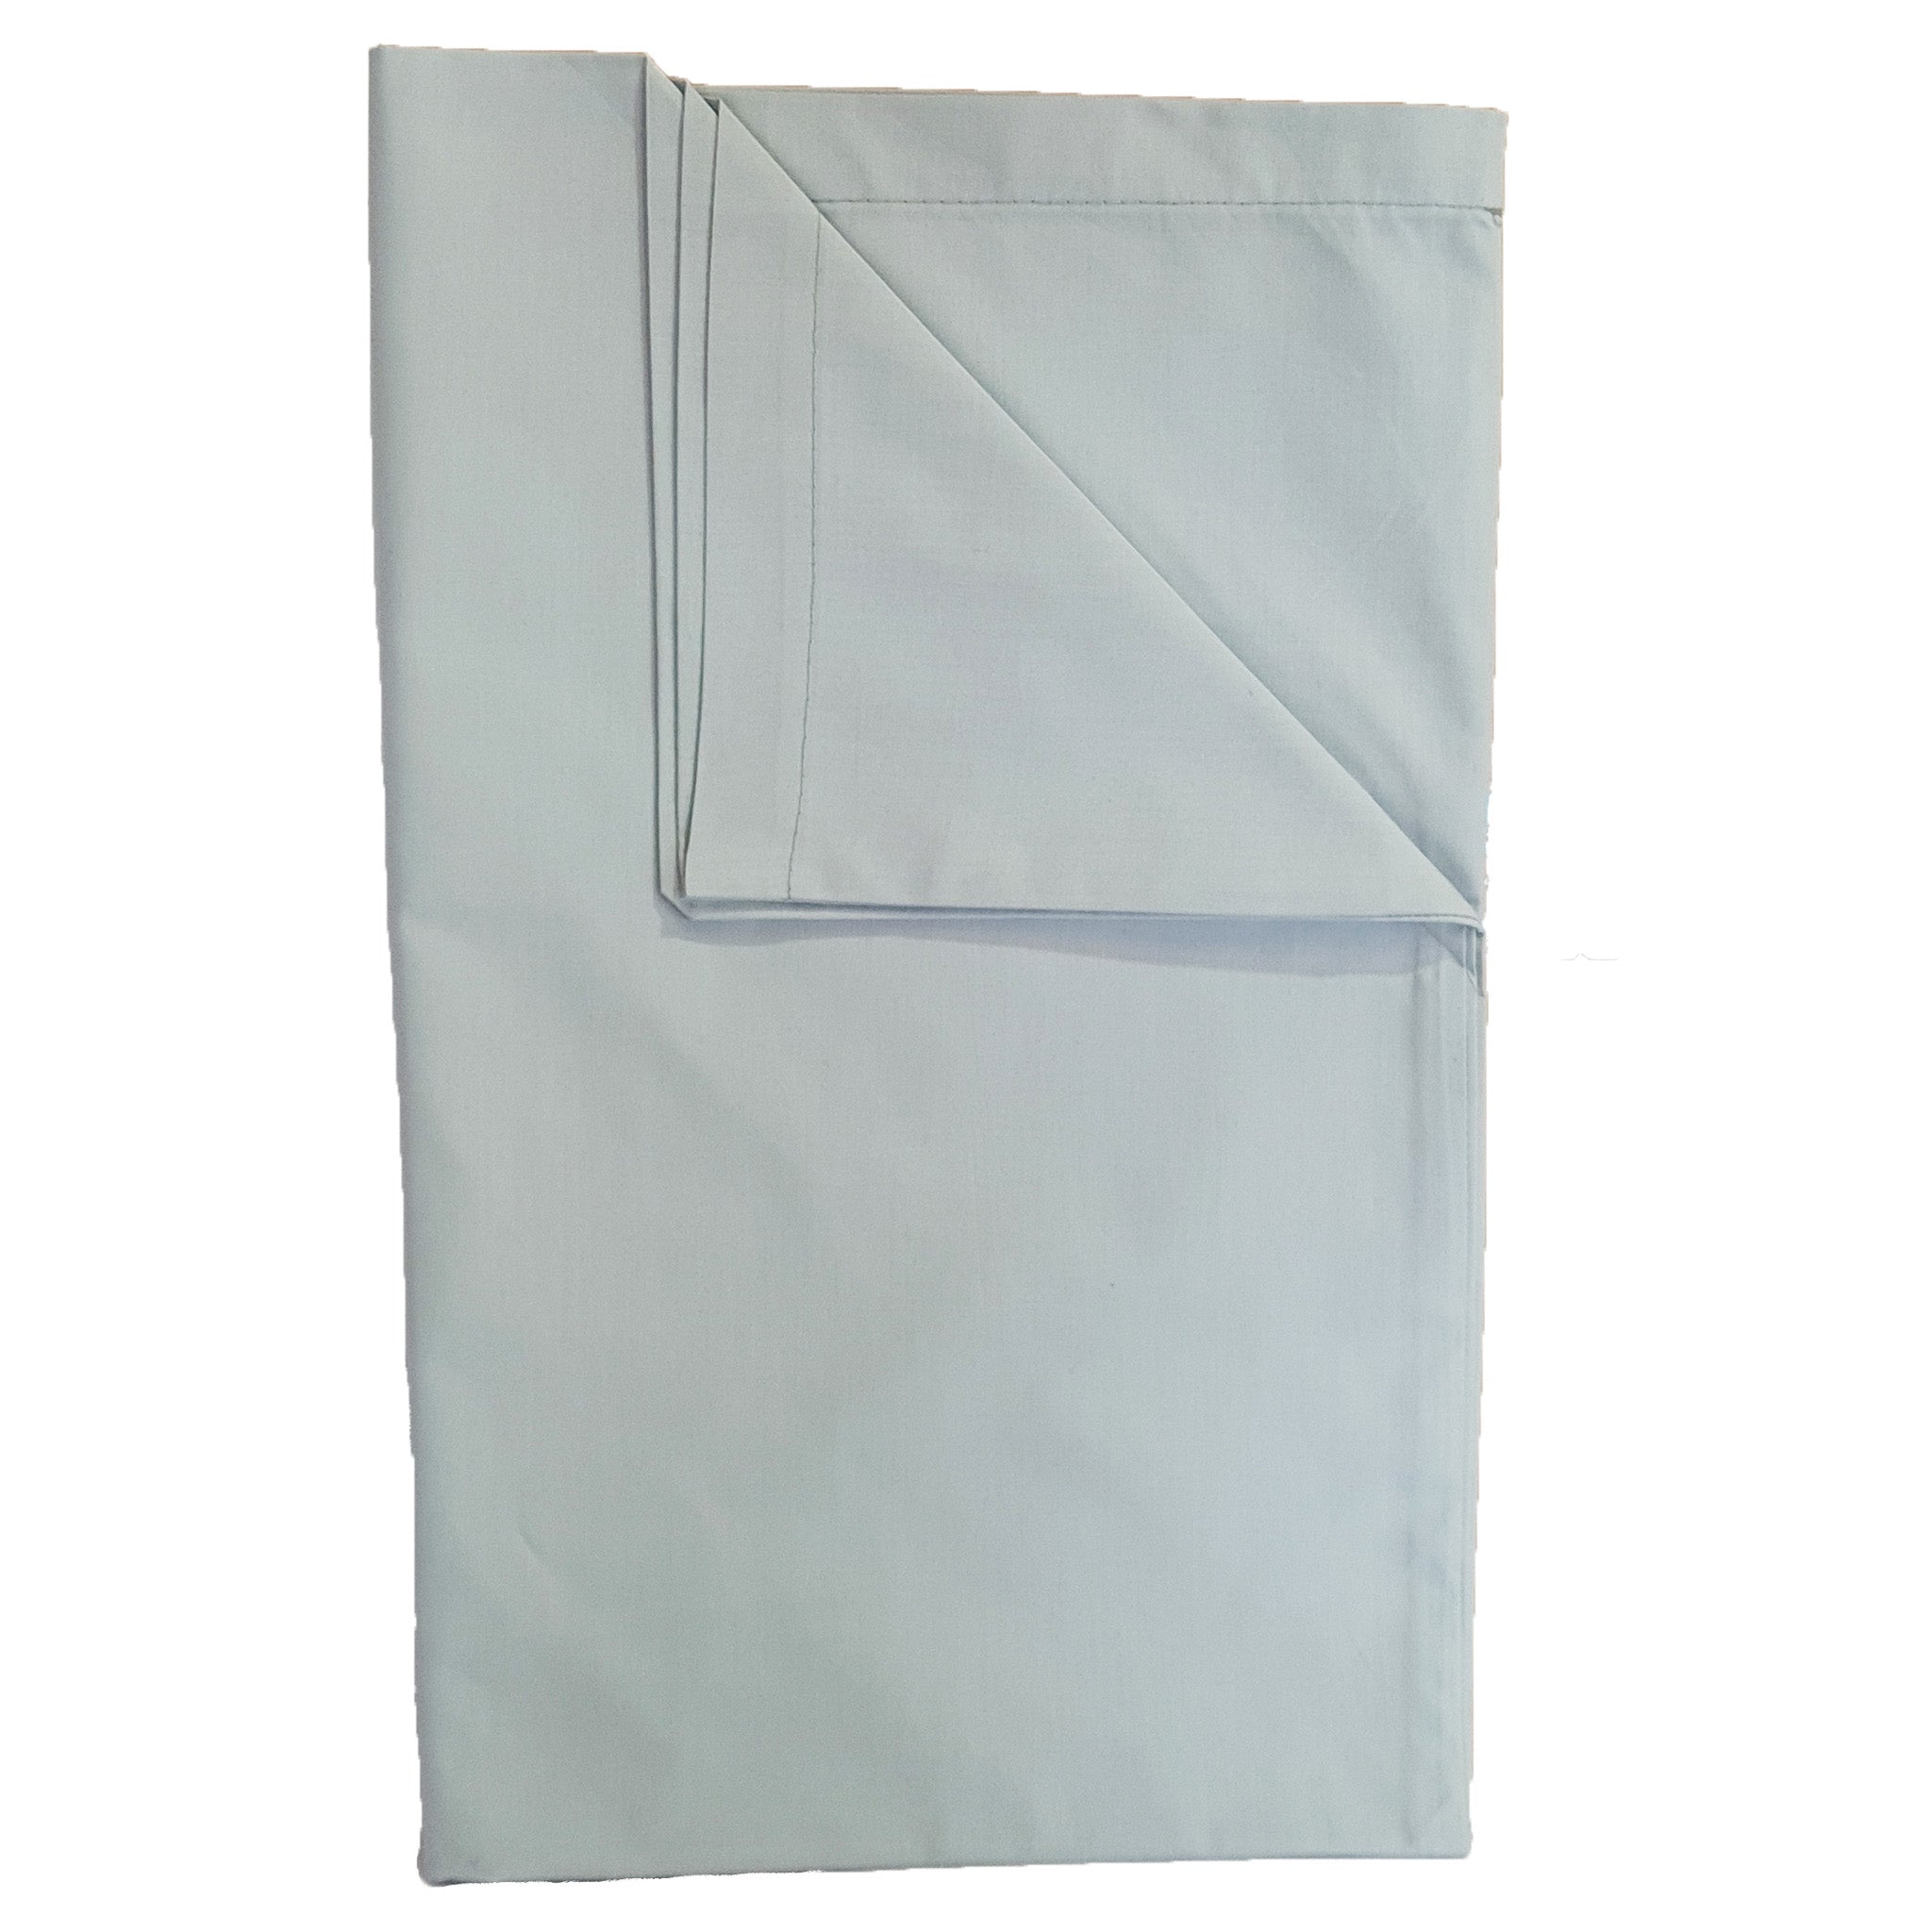 Fitted Sheet Extra Depth (35cm) - Cotton Percale